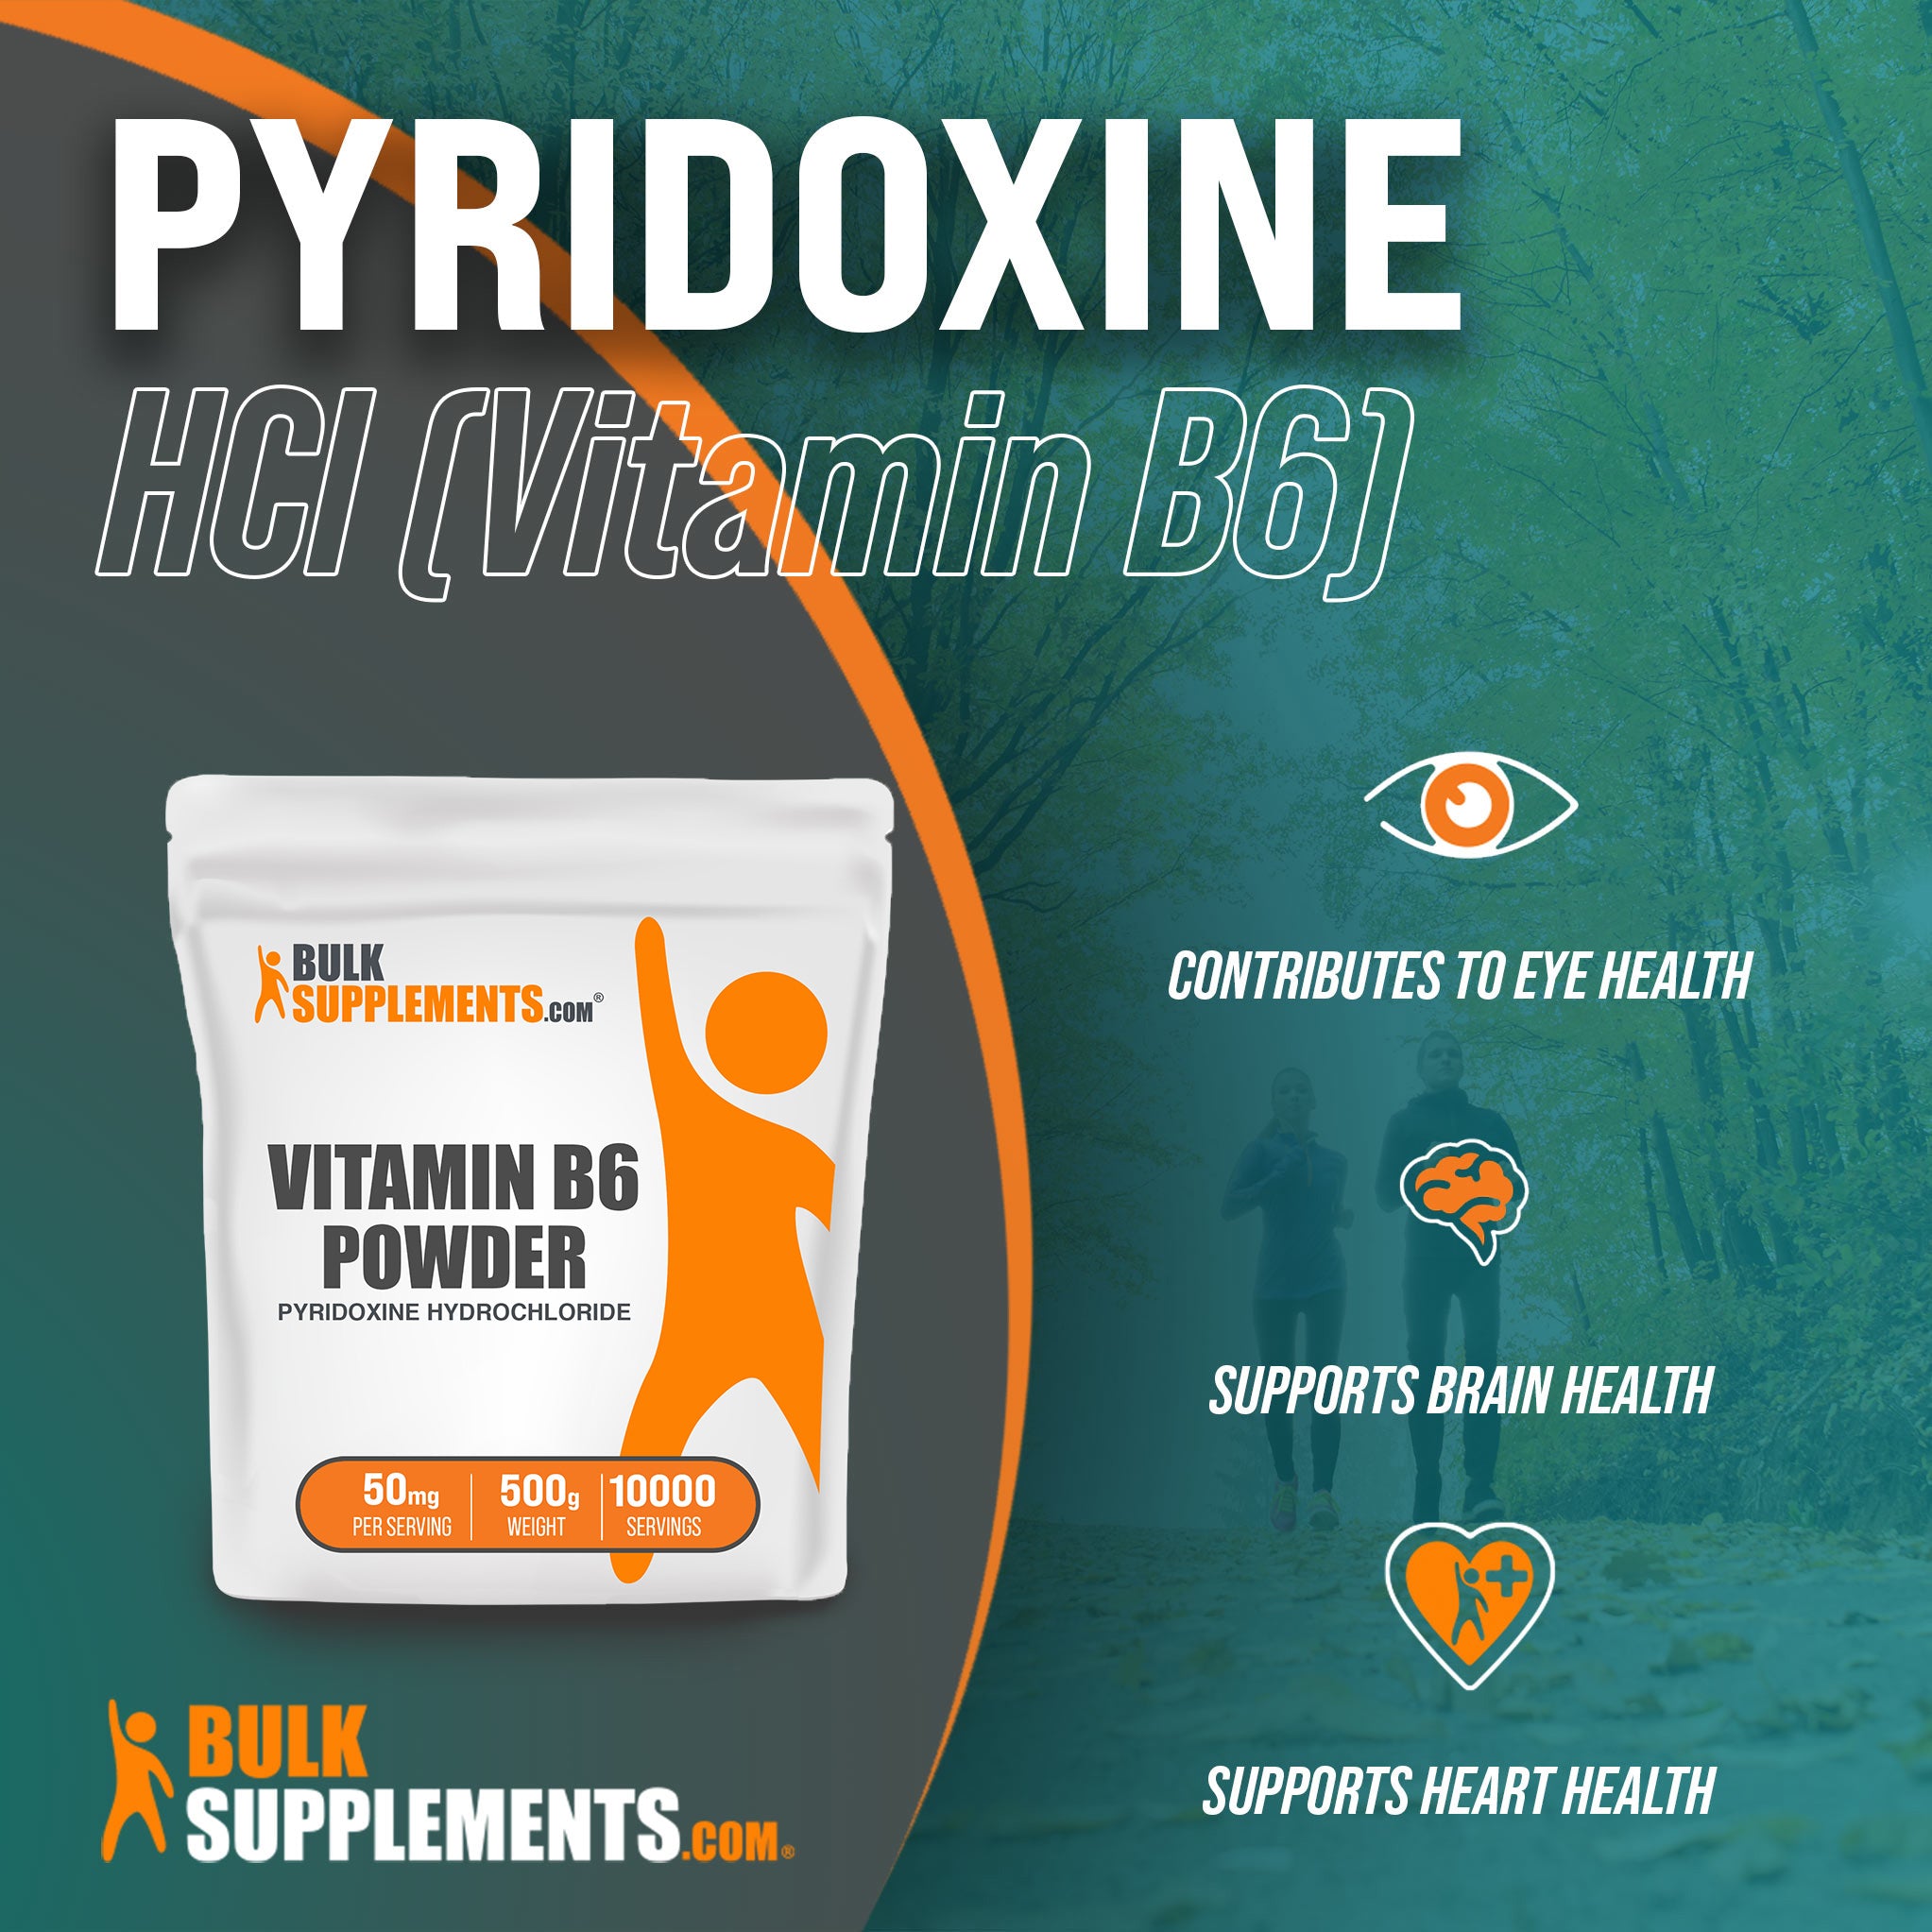 Benefits of Pyridoxine HCl Vitamin B6: contributes to eye health, supports brain health, supports heart health